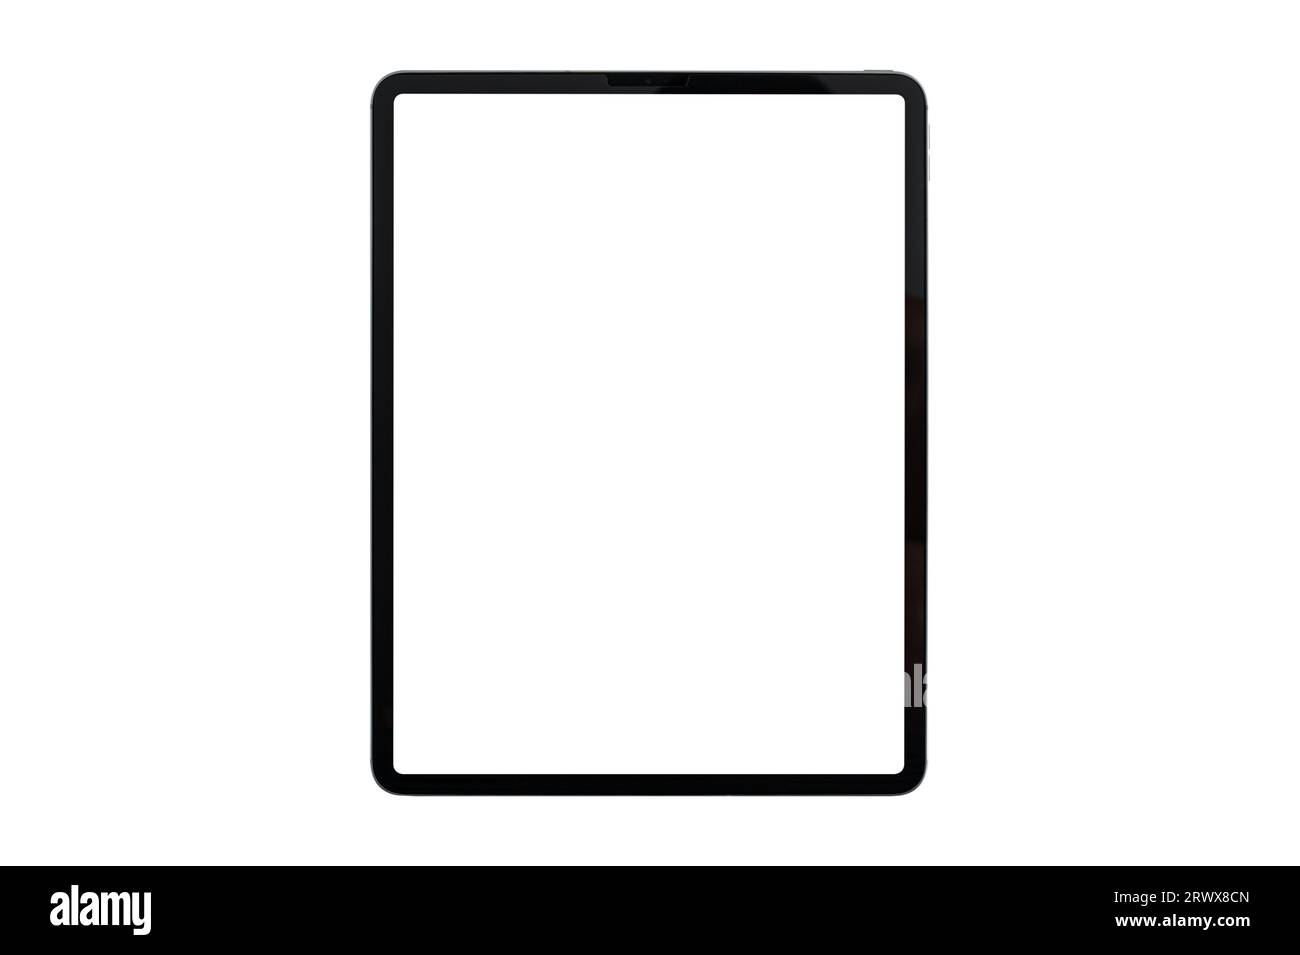 Tablet with blank screen isolated on white background. Stock Photo